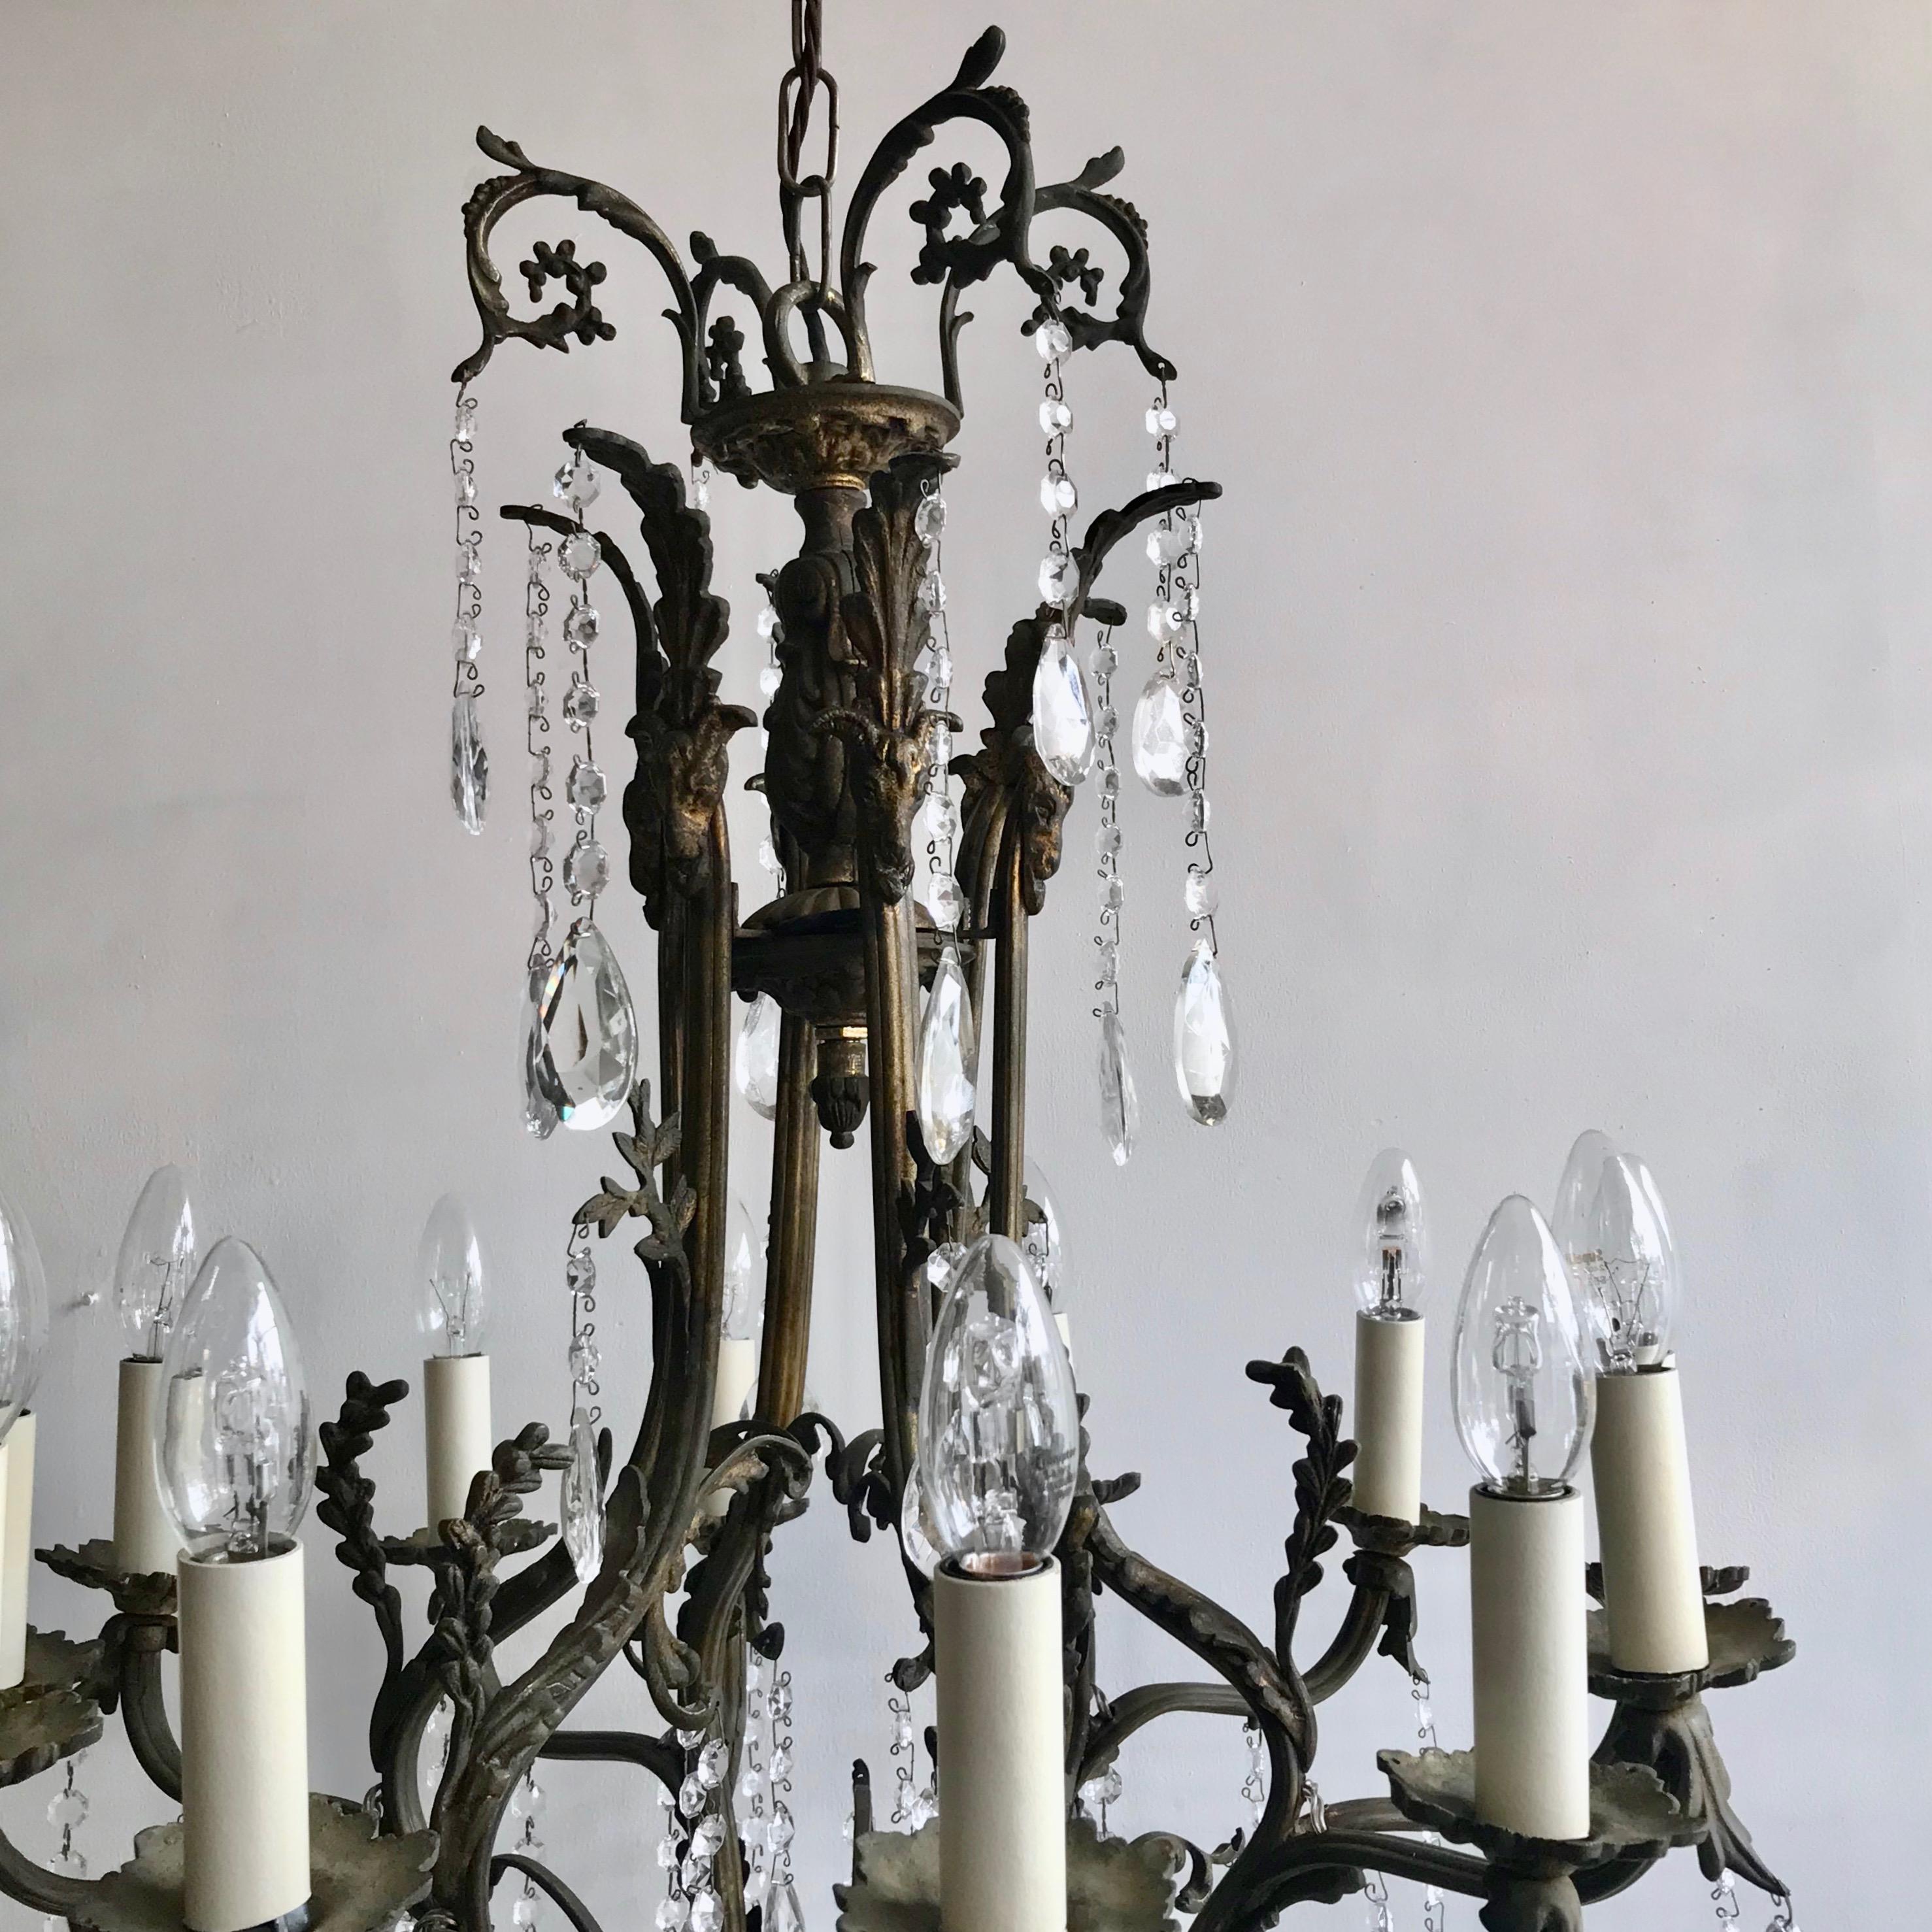 Brass Early 20th Century Italian Ornate Birdcage Chandelier with Crystal Pear Drops